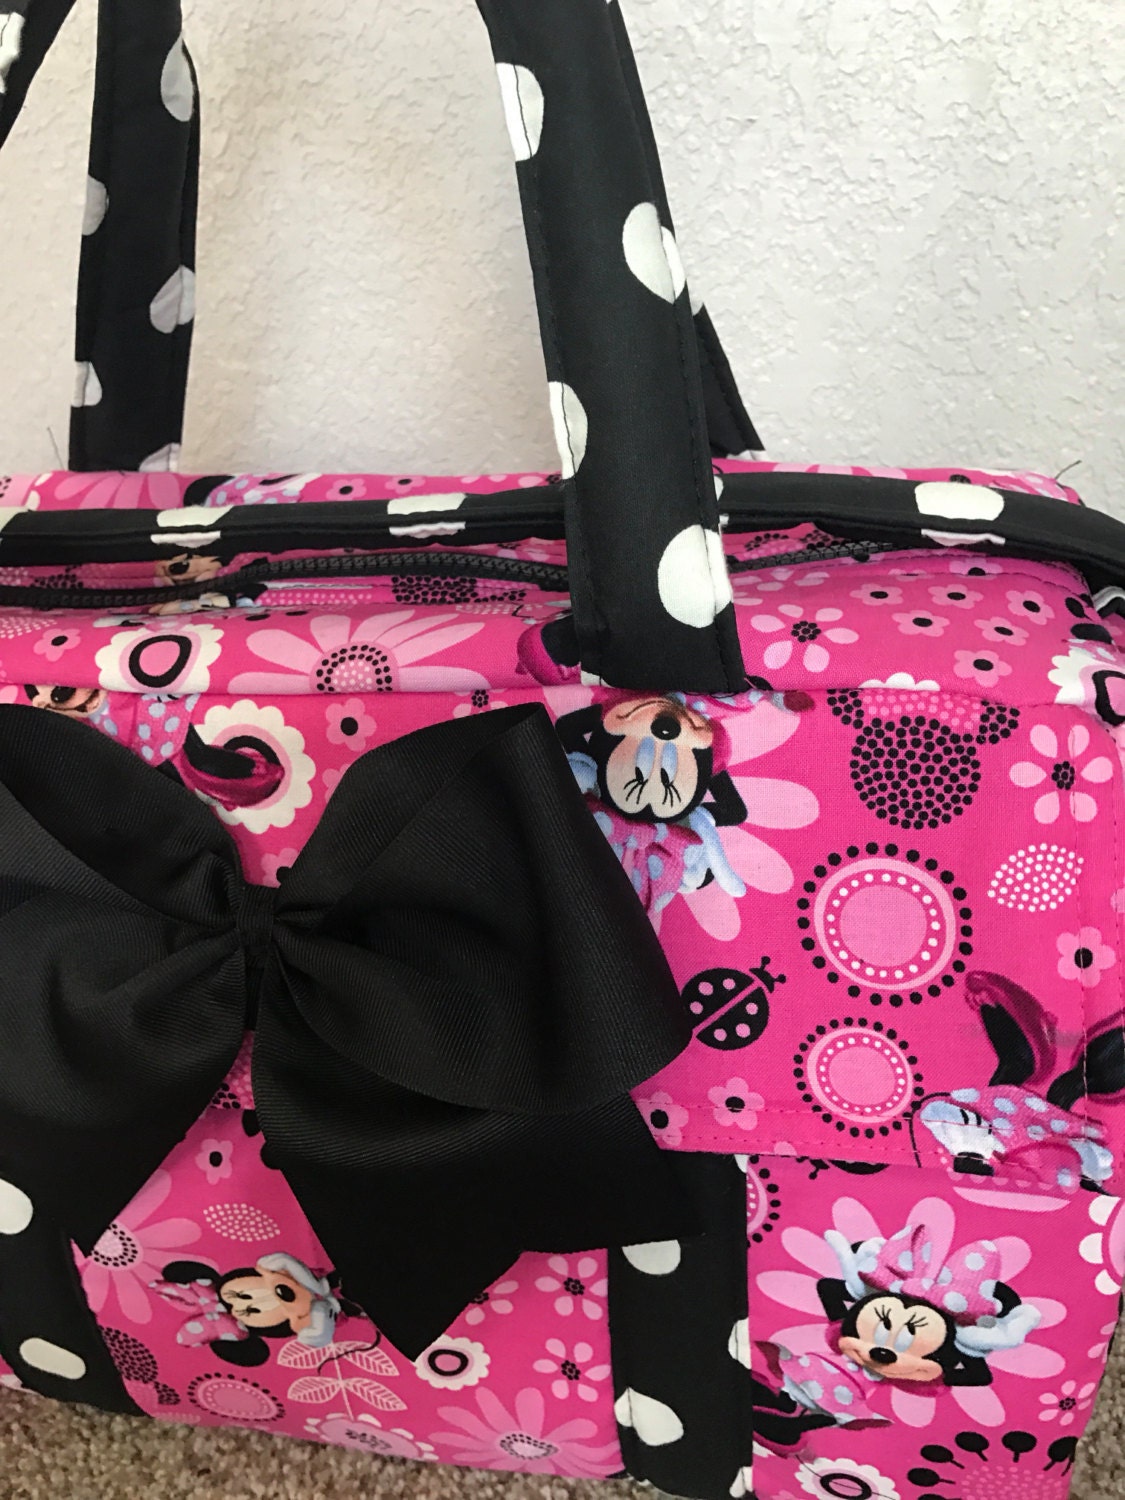 Hot pink Minnie mouse diaper bag with black bow